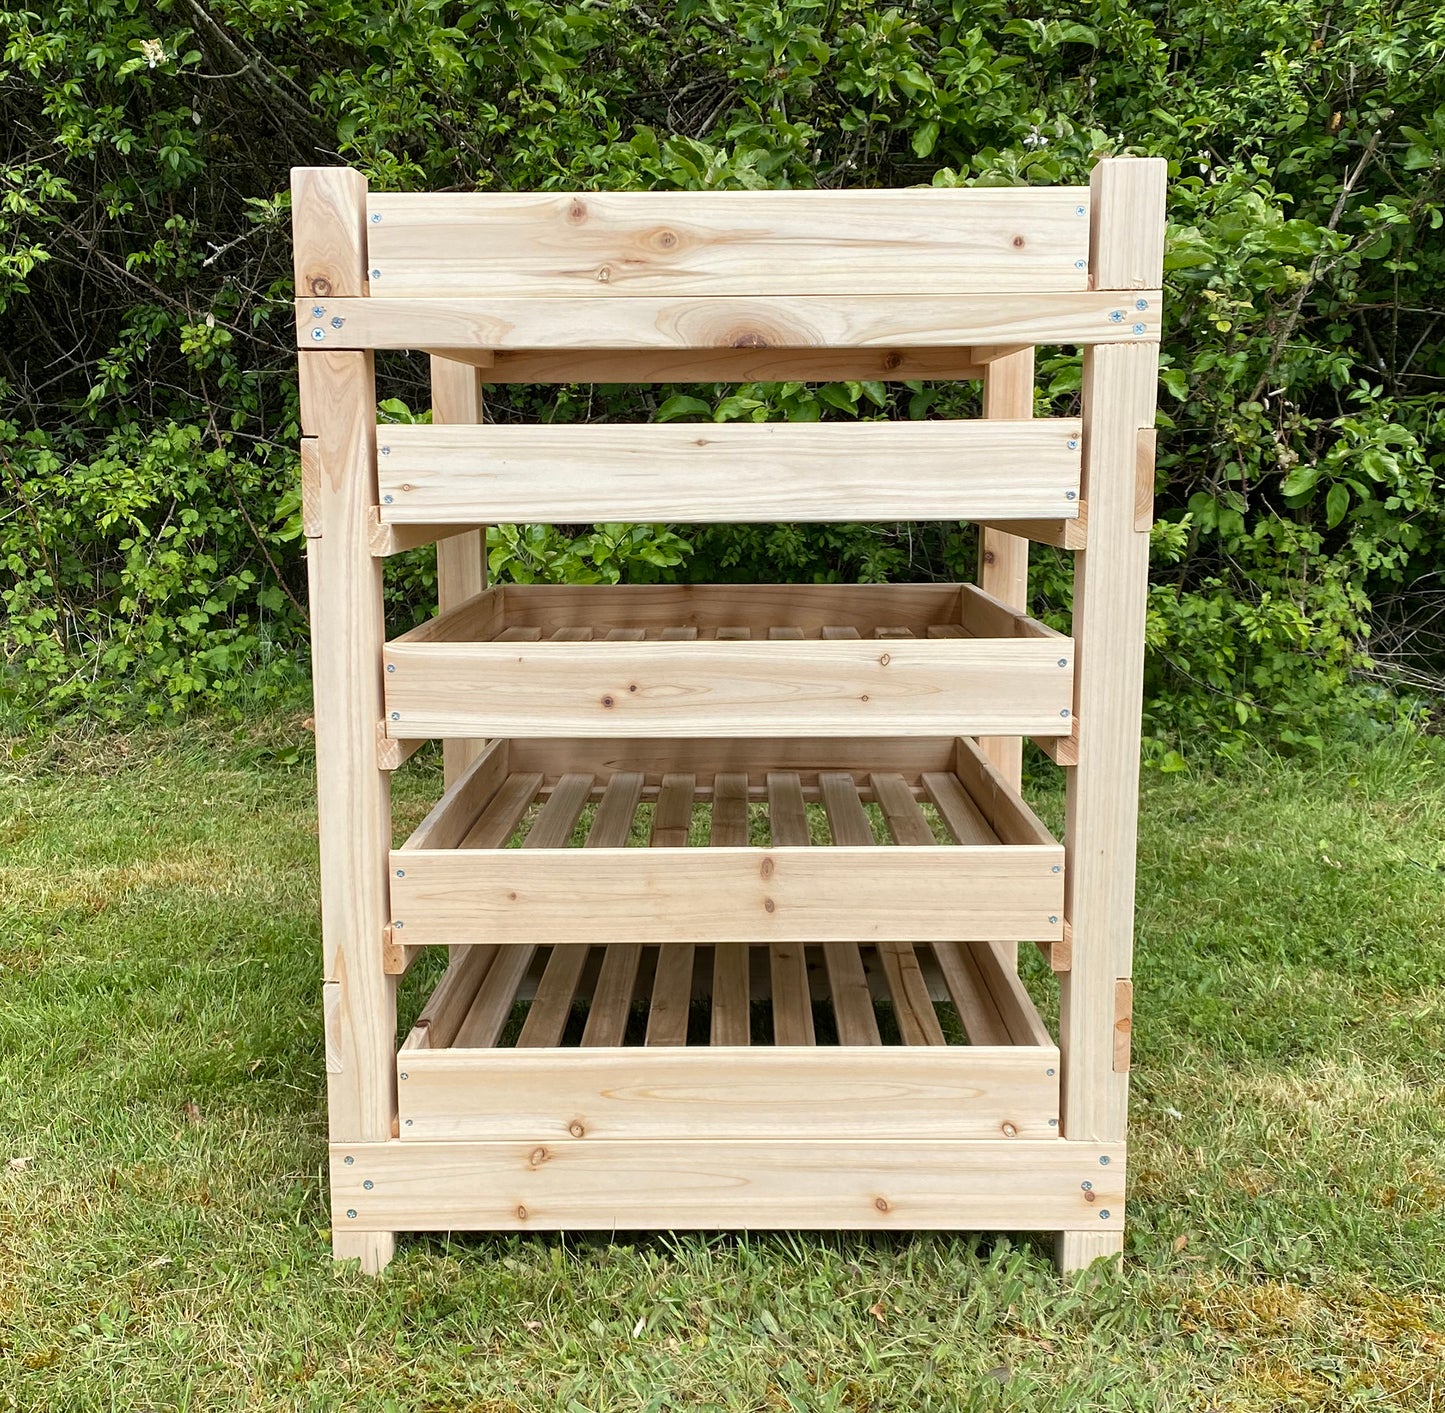 Traditional Wooden Apple Storage Rack (5 Drawer)